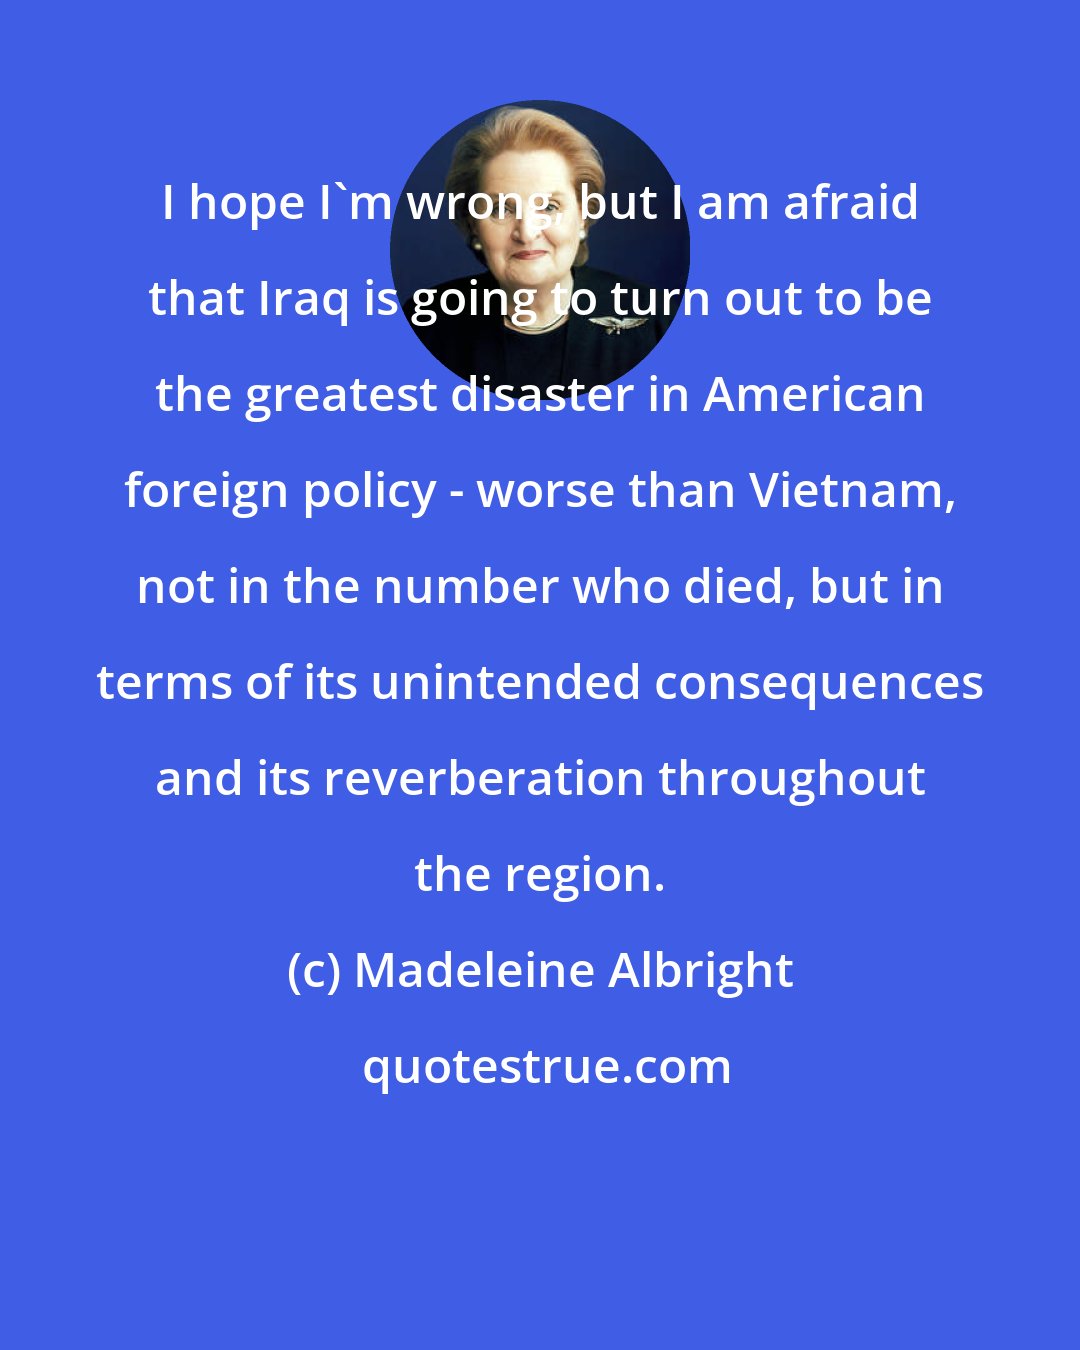 Madeleine Albright: I hope I'm wrong, but I am afraid that Iraq is going to turn out to be the greatest disaster in American foreign policy - worse than Vietnam, not in the number who died, but in terms of its unintended consequences and its reverberation throughout the region.